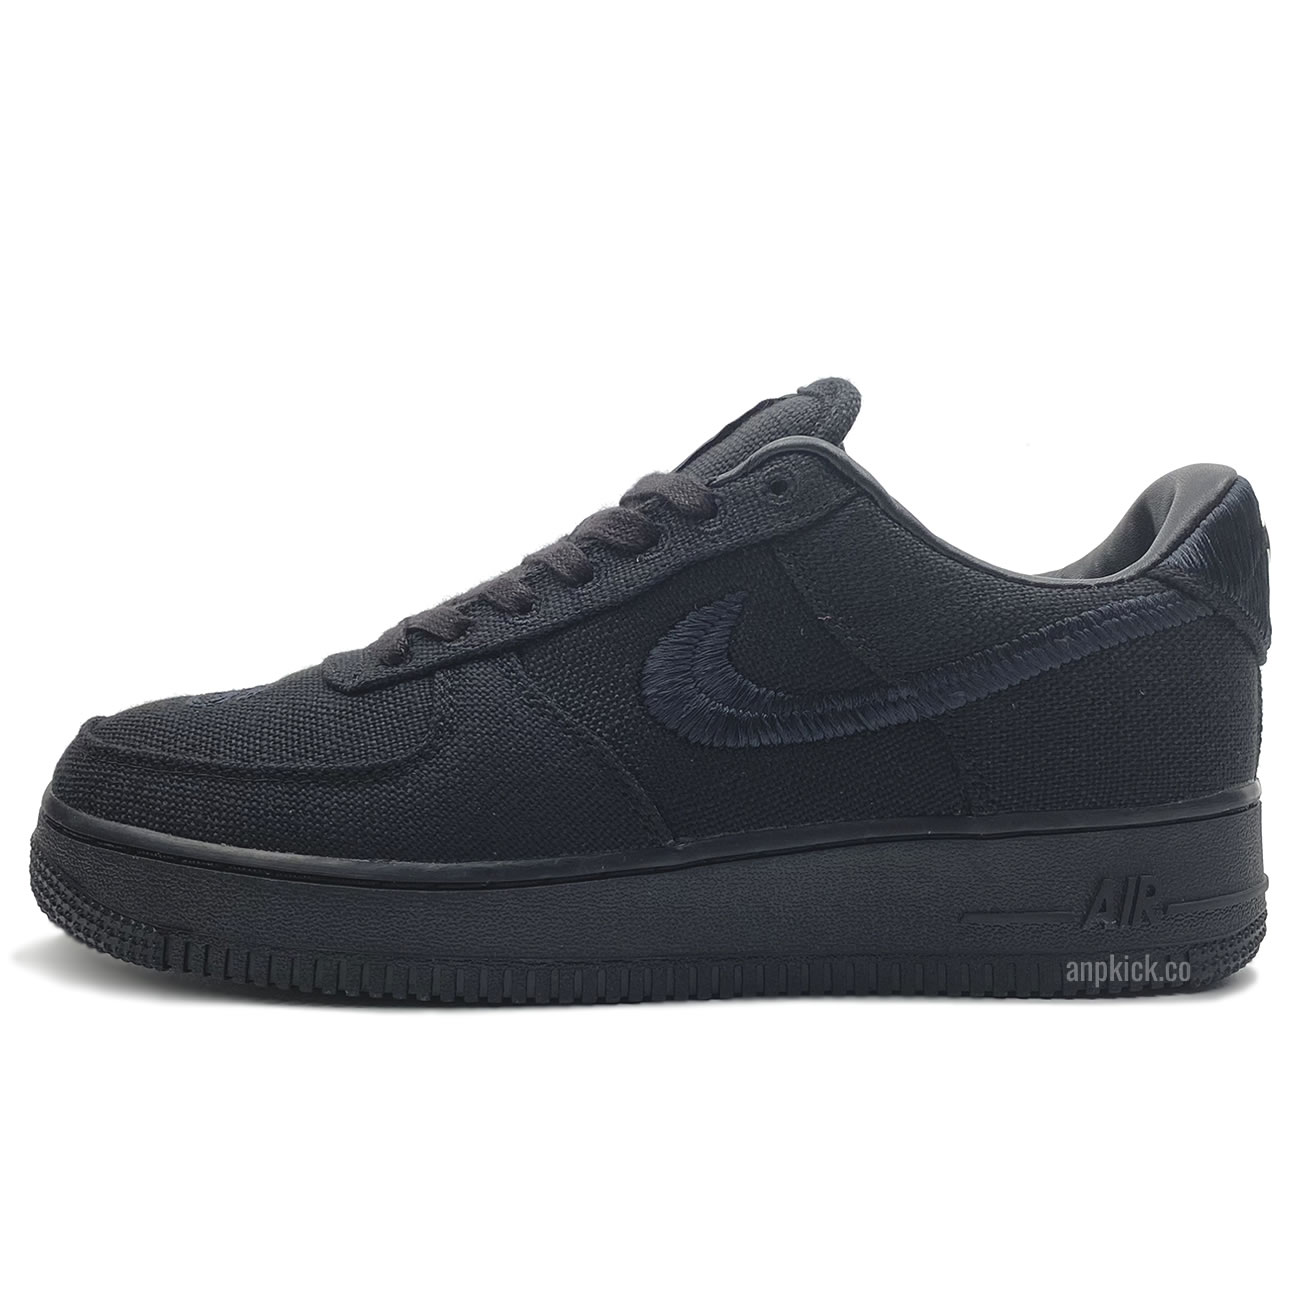 Stussy x Nike Air Force 1 Low "Black" CZ9084-001 Release Date